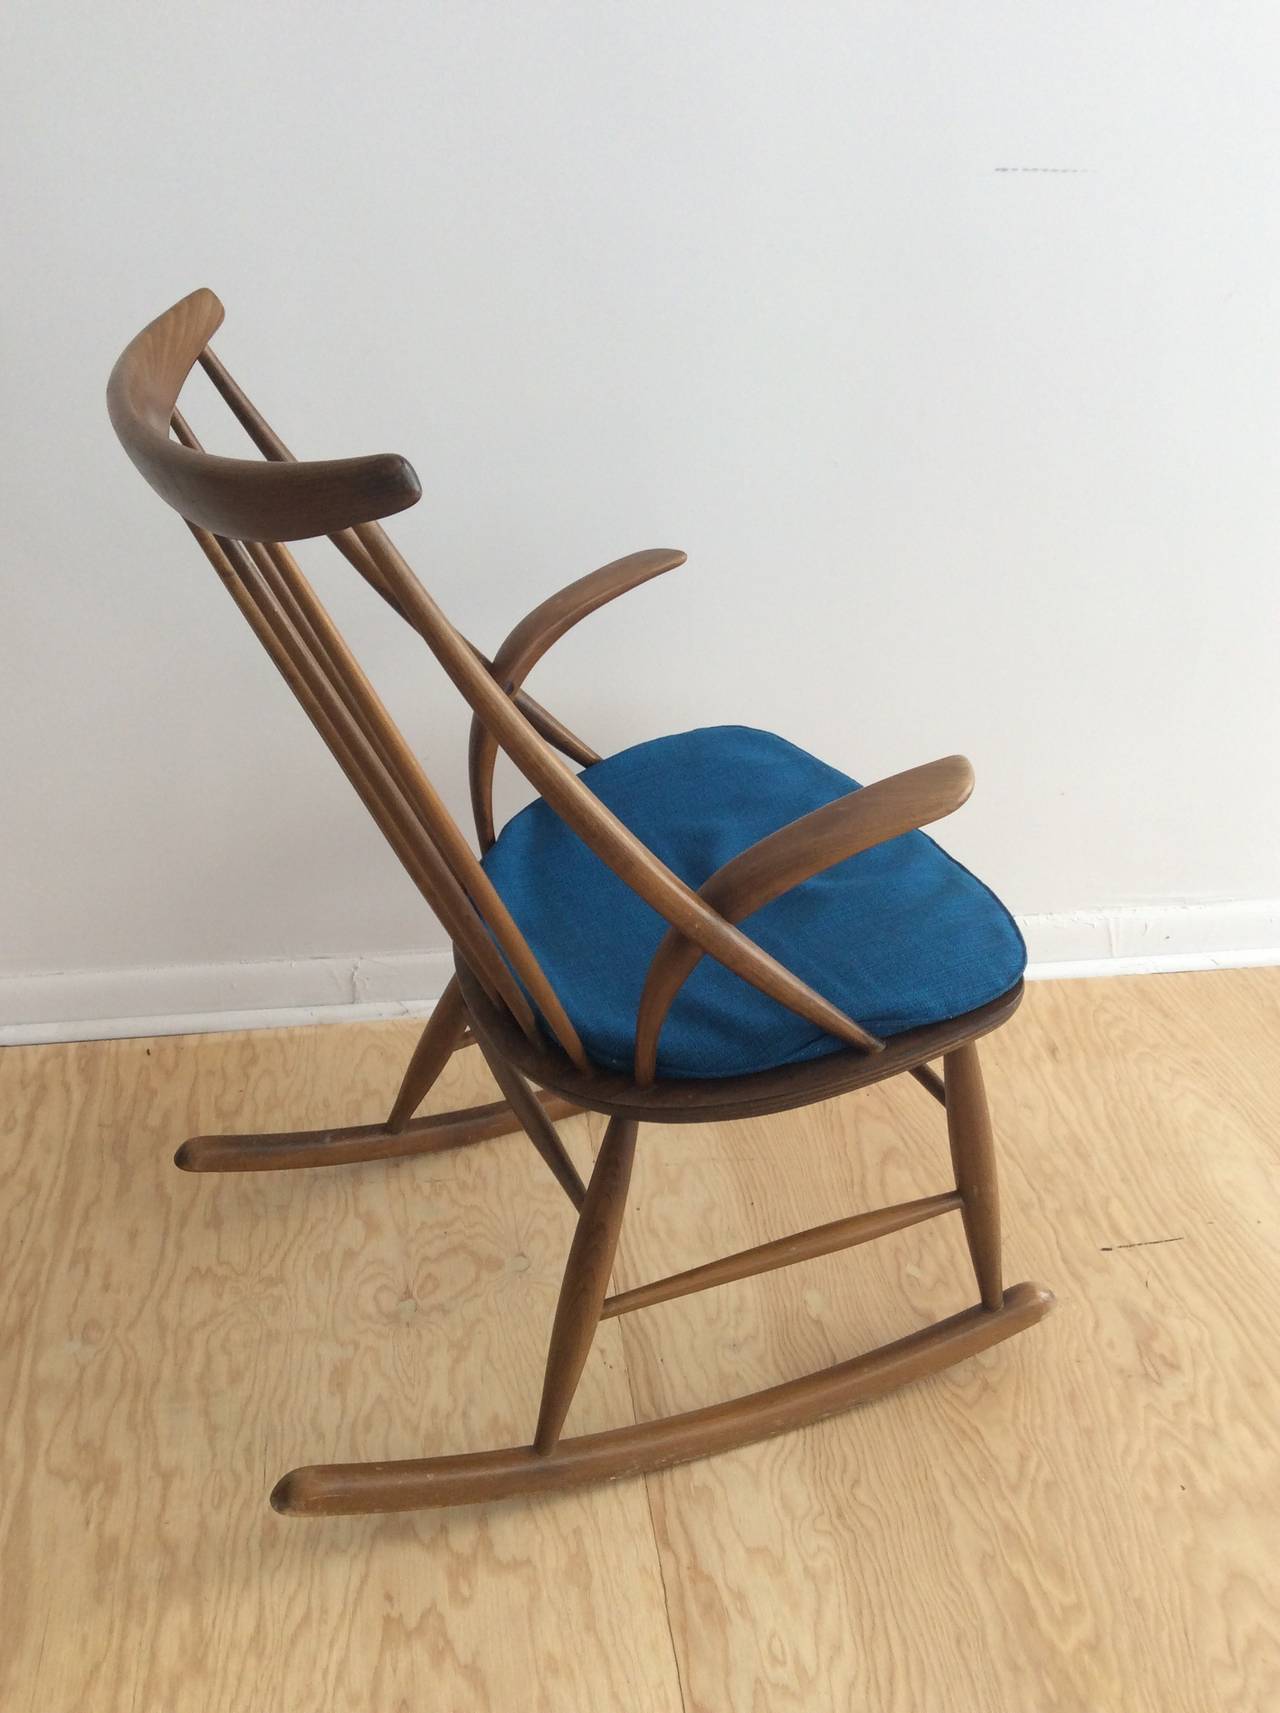 Danish rocking chair by Illum Wikkelso with blue cushion.